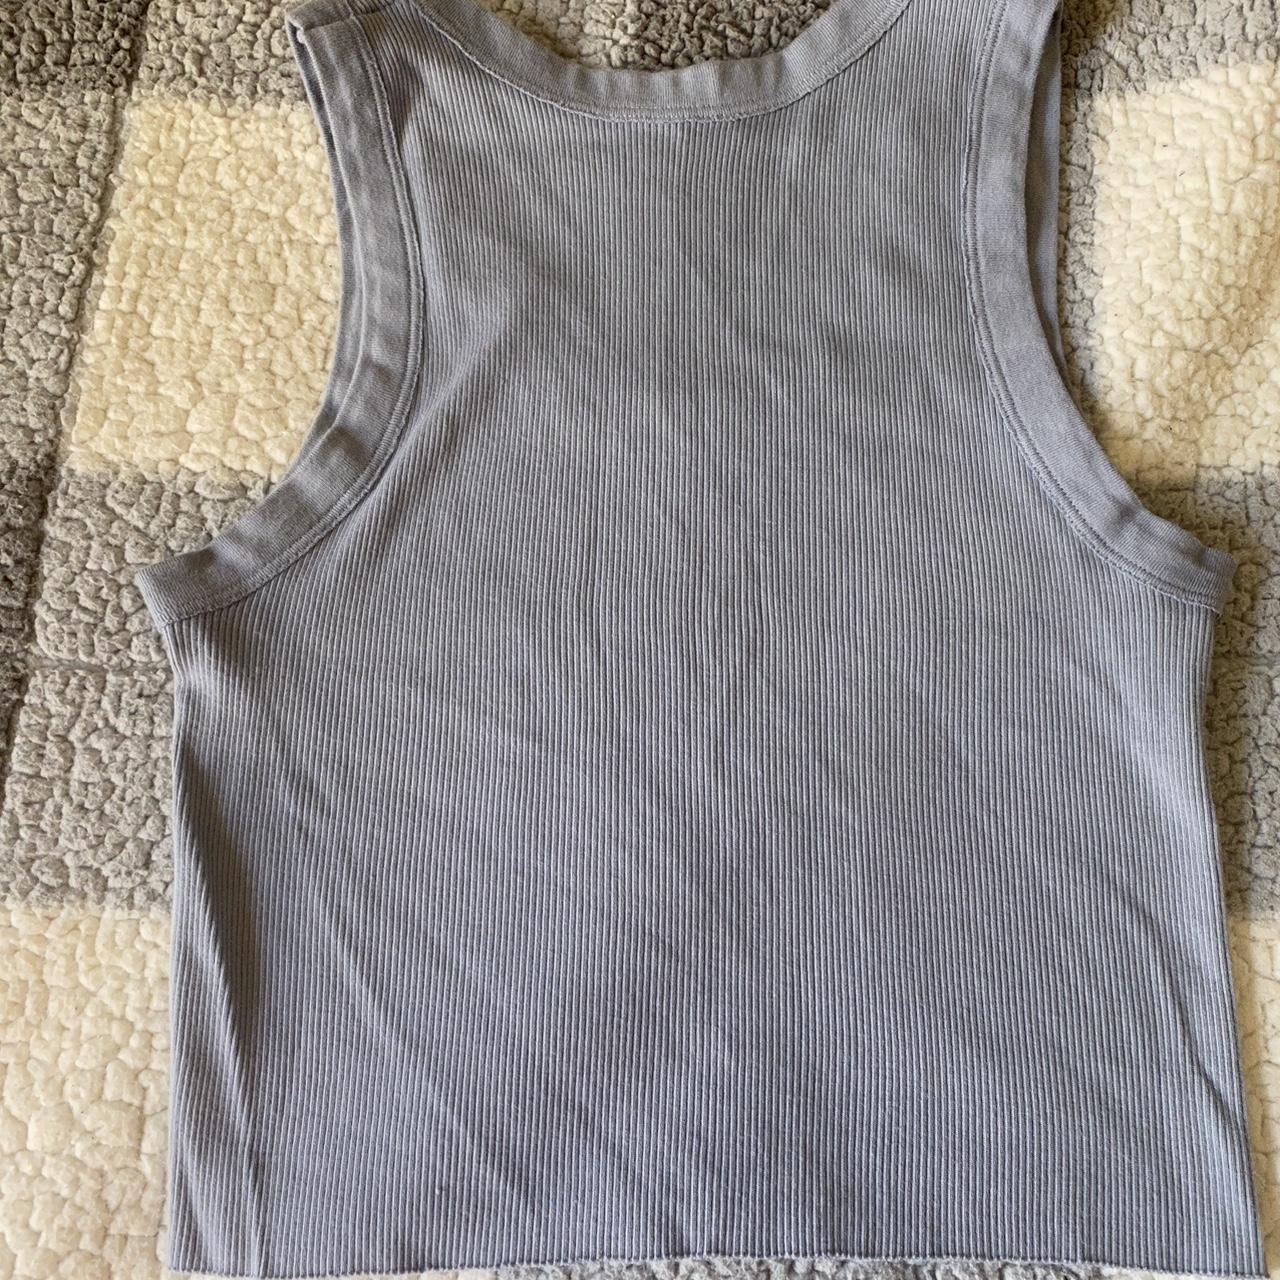 Brandy Melville connor tank top Ribbed, stretchy - Depop